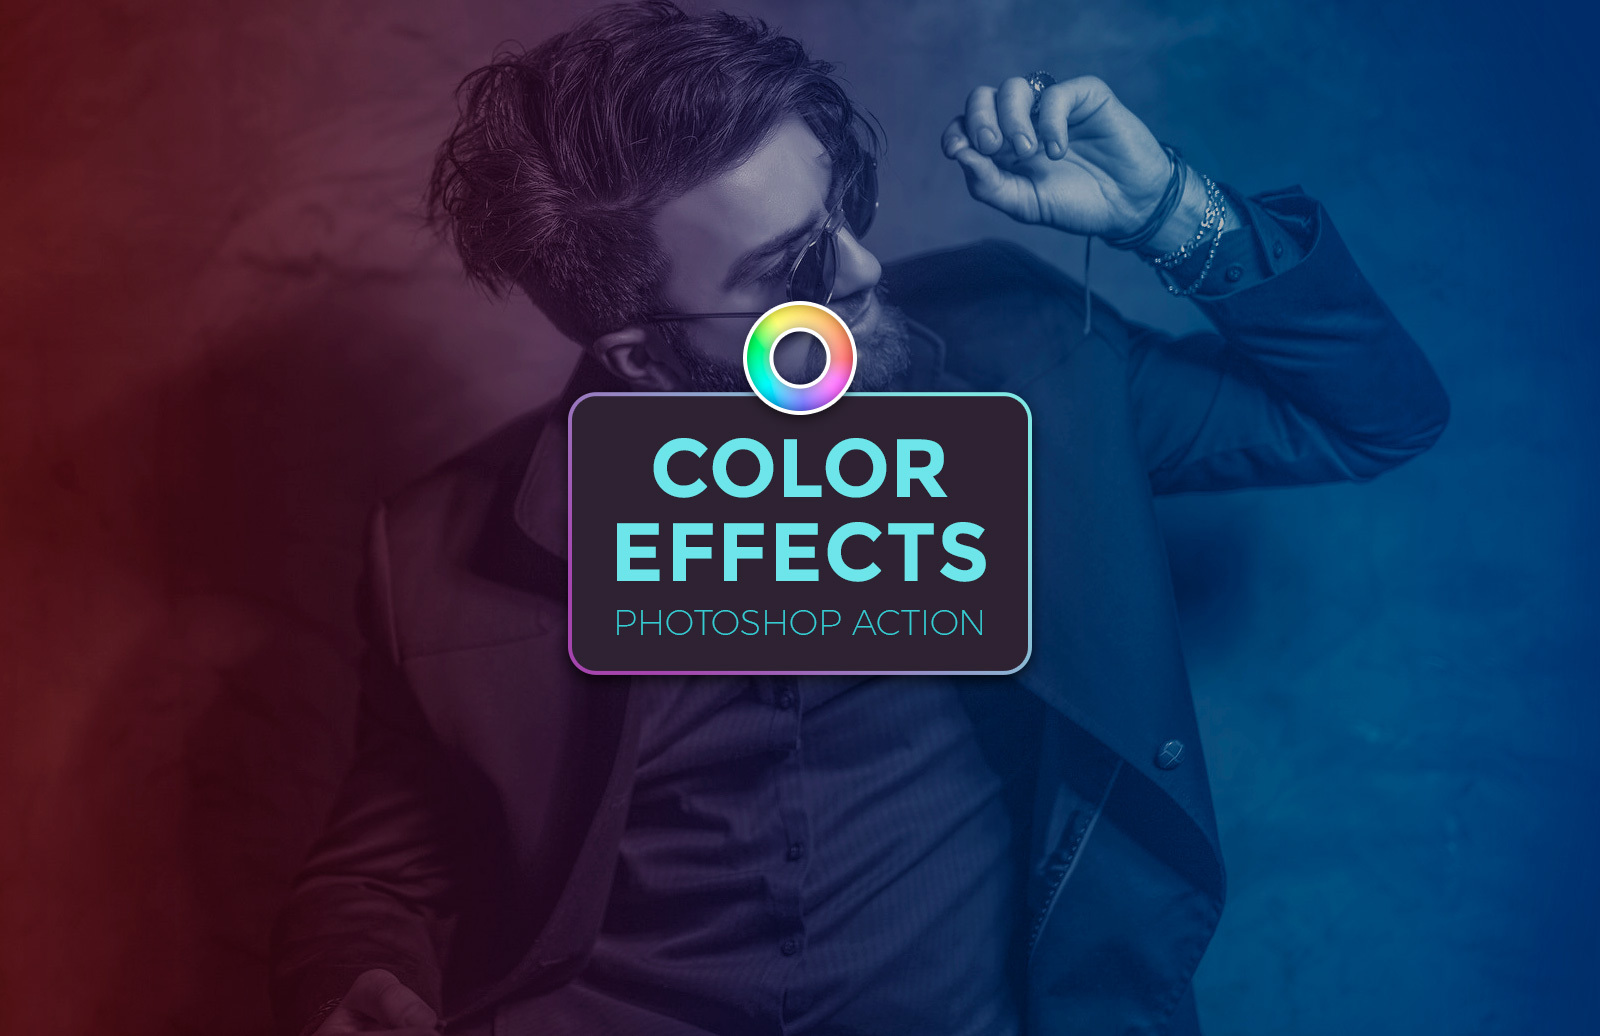 adobe photoshop color effects free download